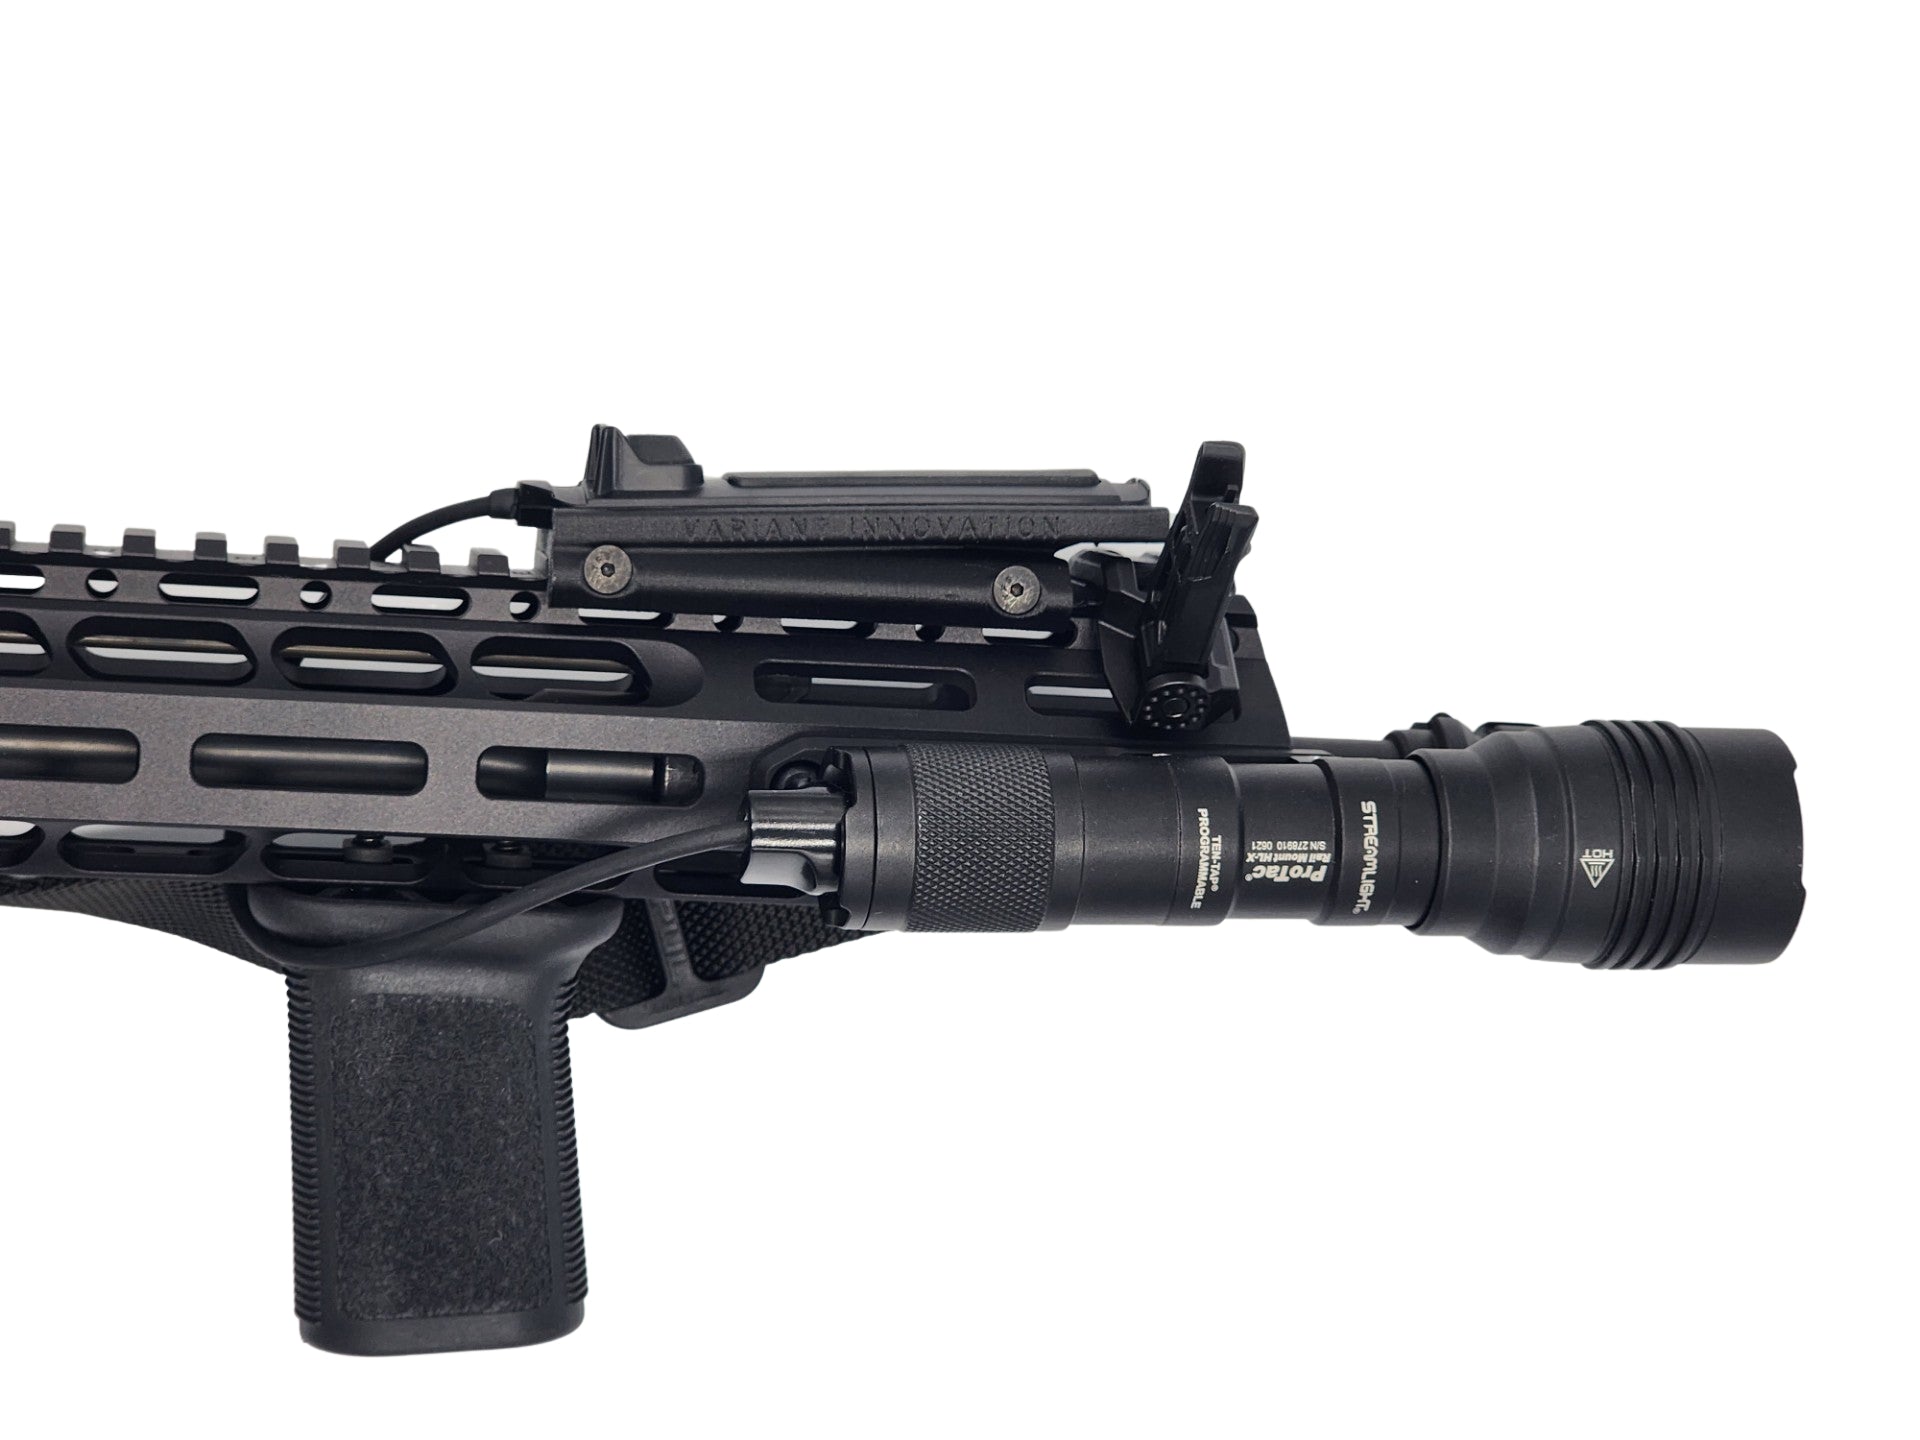 Many accessories, such as the offset Magpul sights, fit underneath the overhang of the F-Stop, but still allow for use